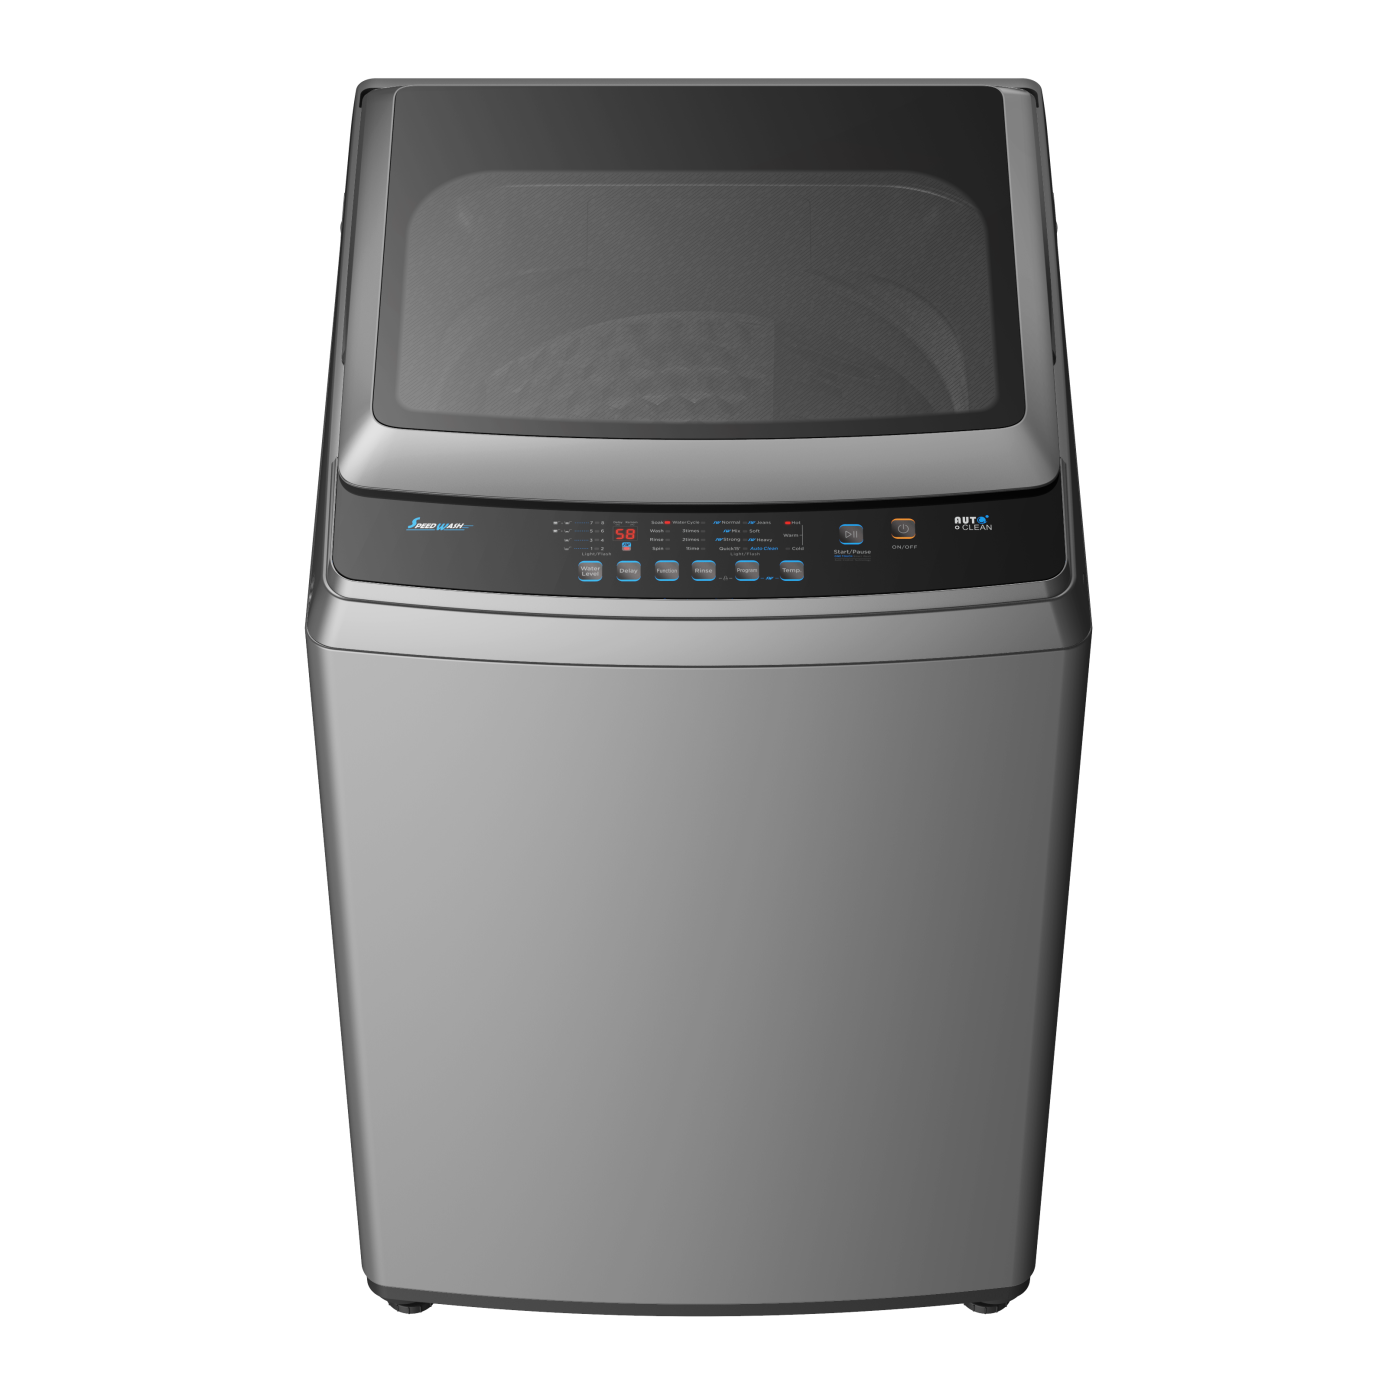 Top Loading Washer